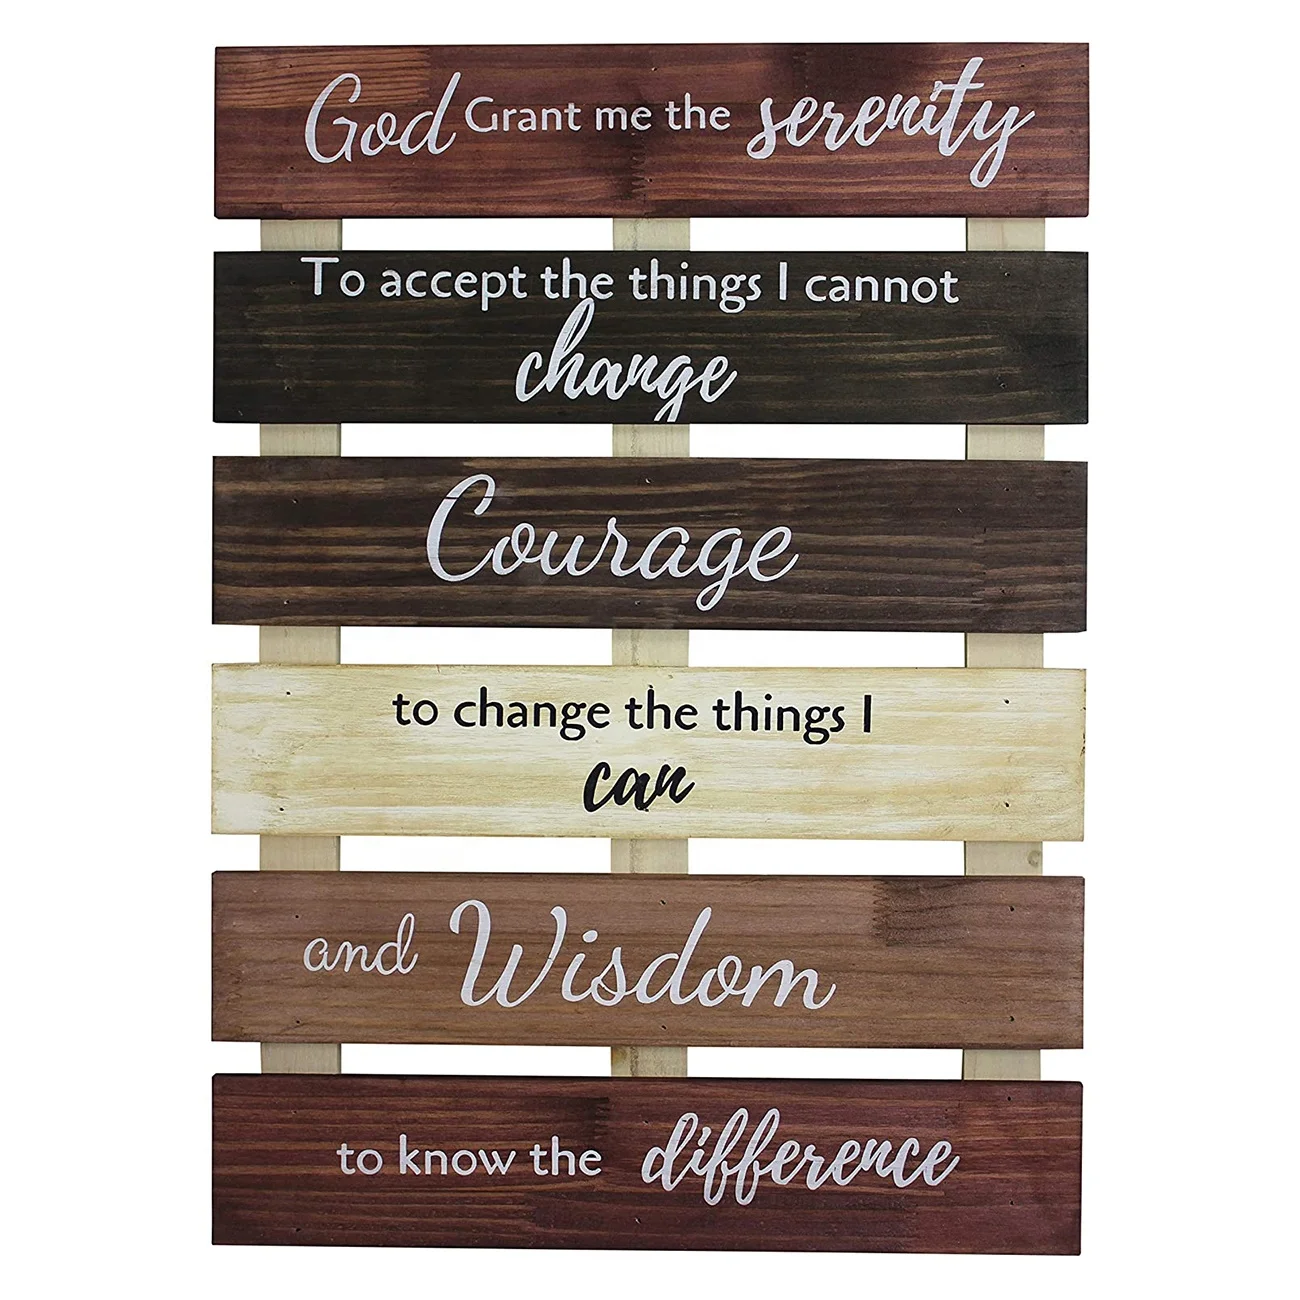 

Vintage Rustic Farmhouse Wall Sign Home Decor Kitchen Serenity Prayer Wood Pallet Skid Barnwood Color Decorative Wall Plaque Art